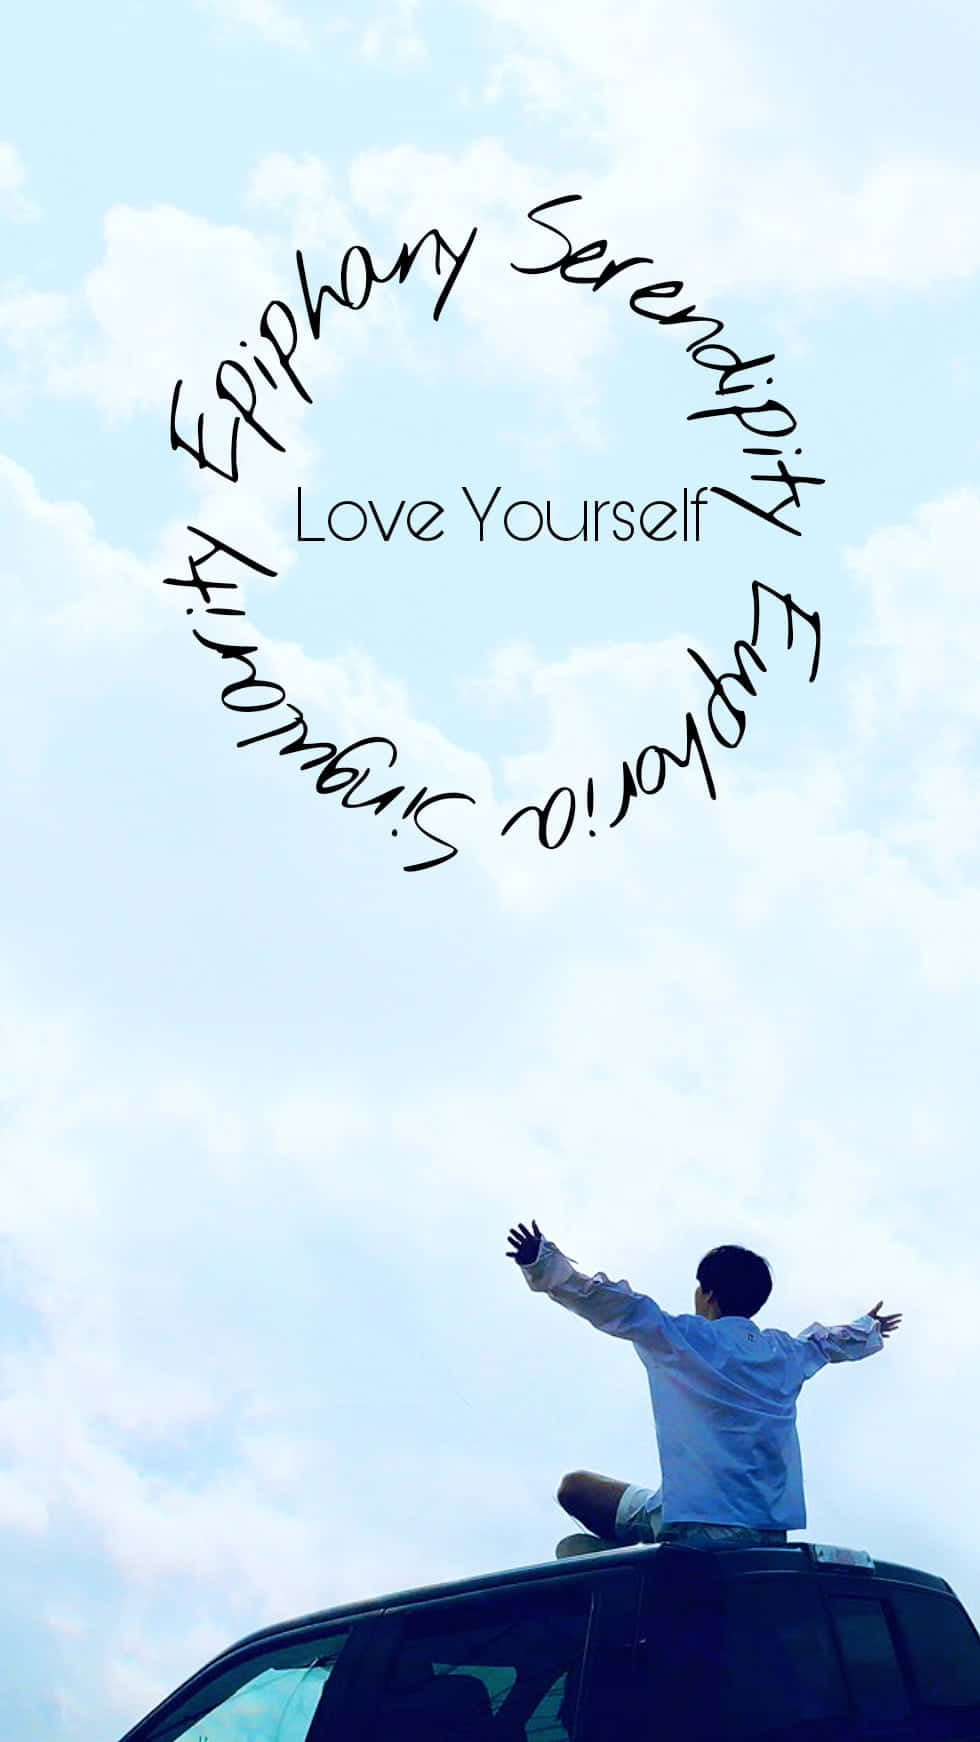 Love yourself - there's nothing more important. Wallpaper